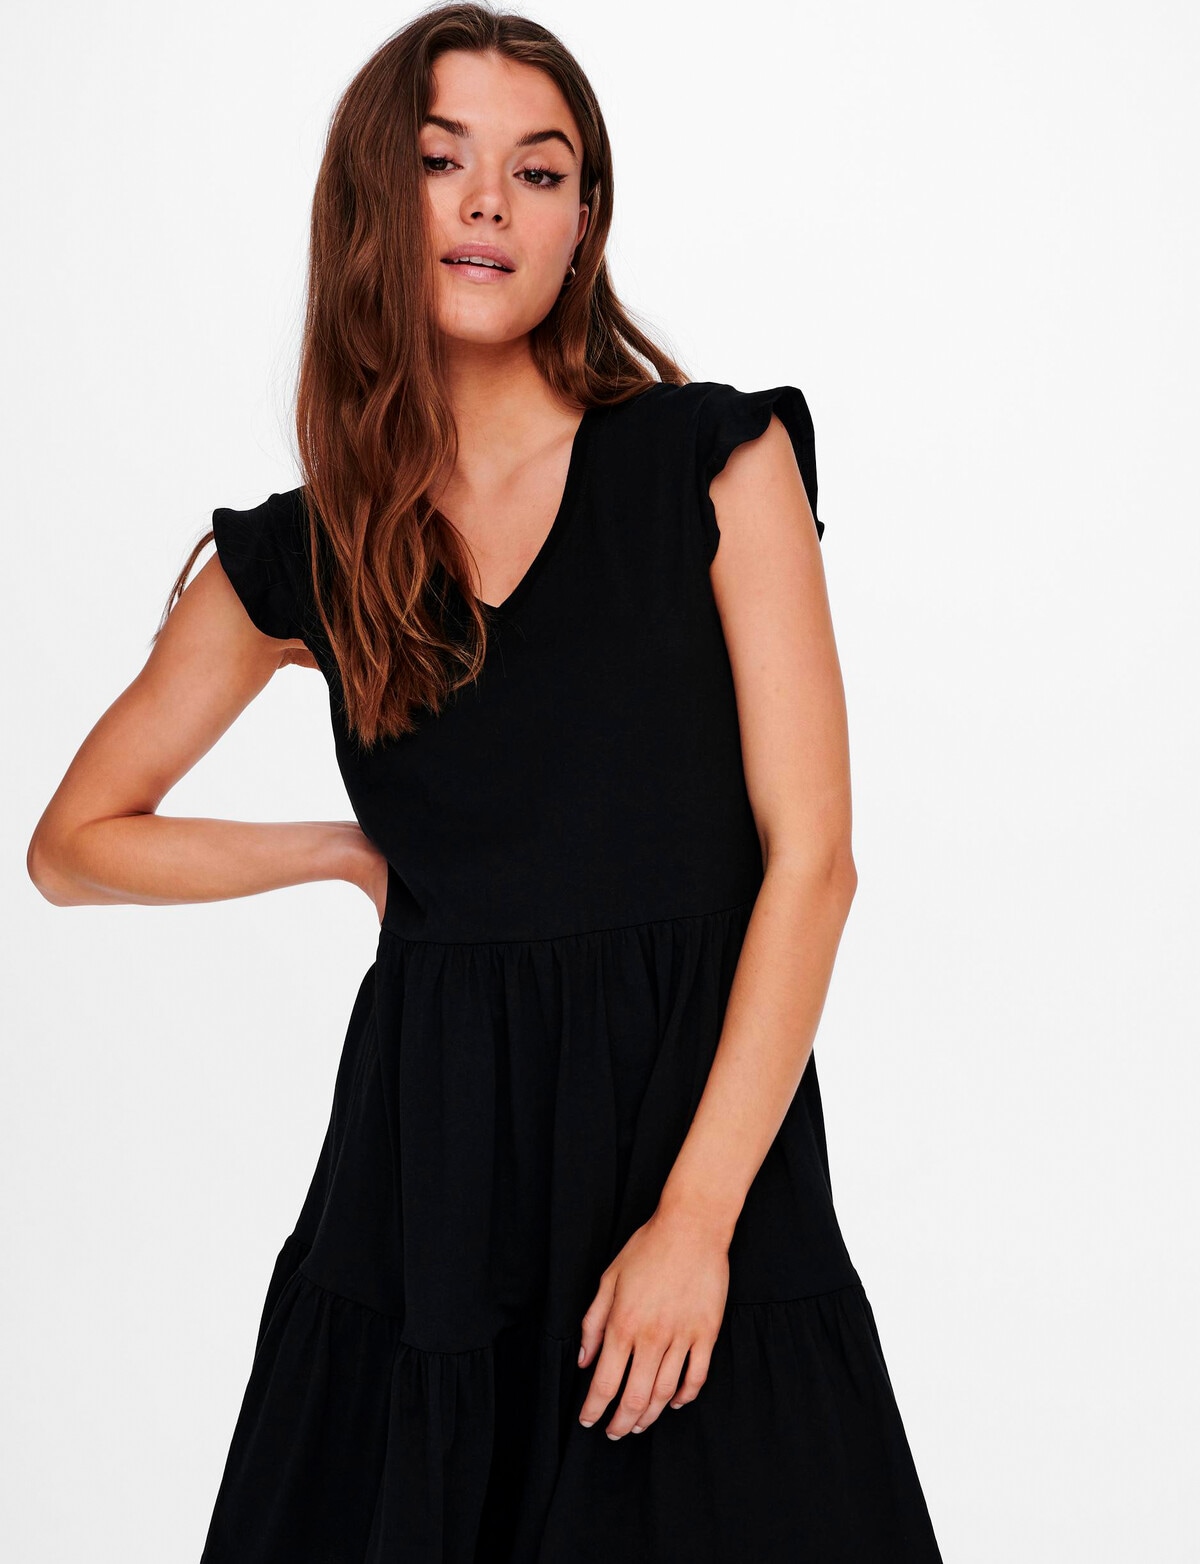 Dress, Black Frill Dresses May Sleeve Cap Life - ONLY